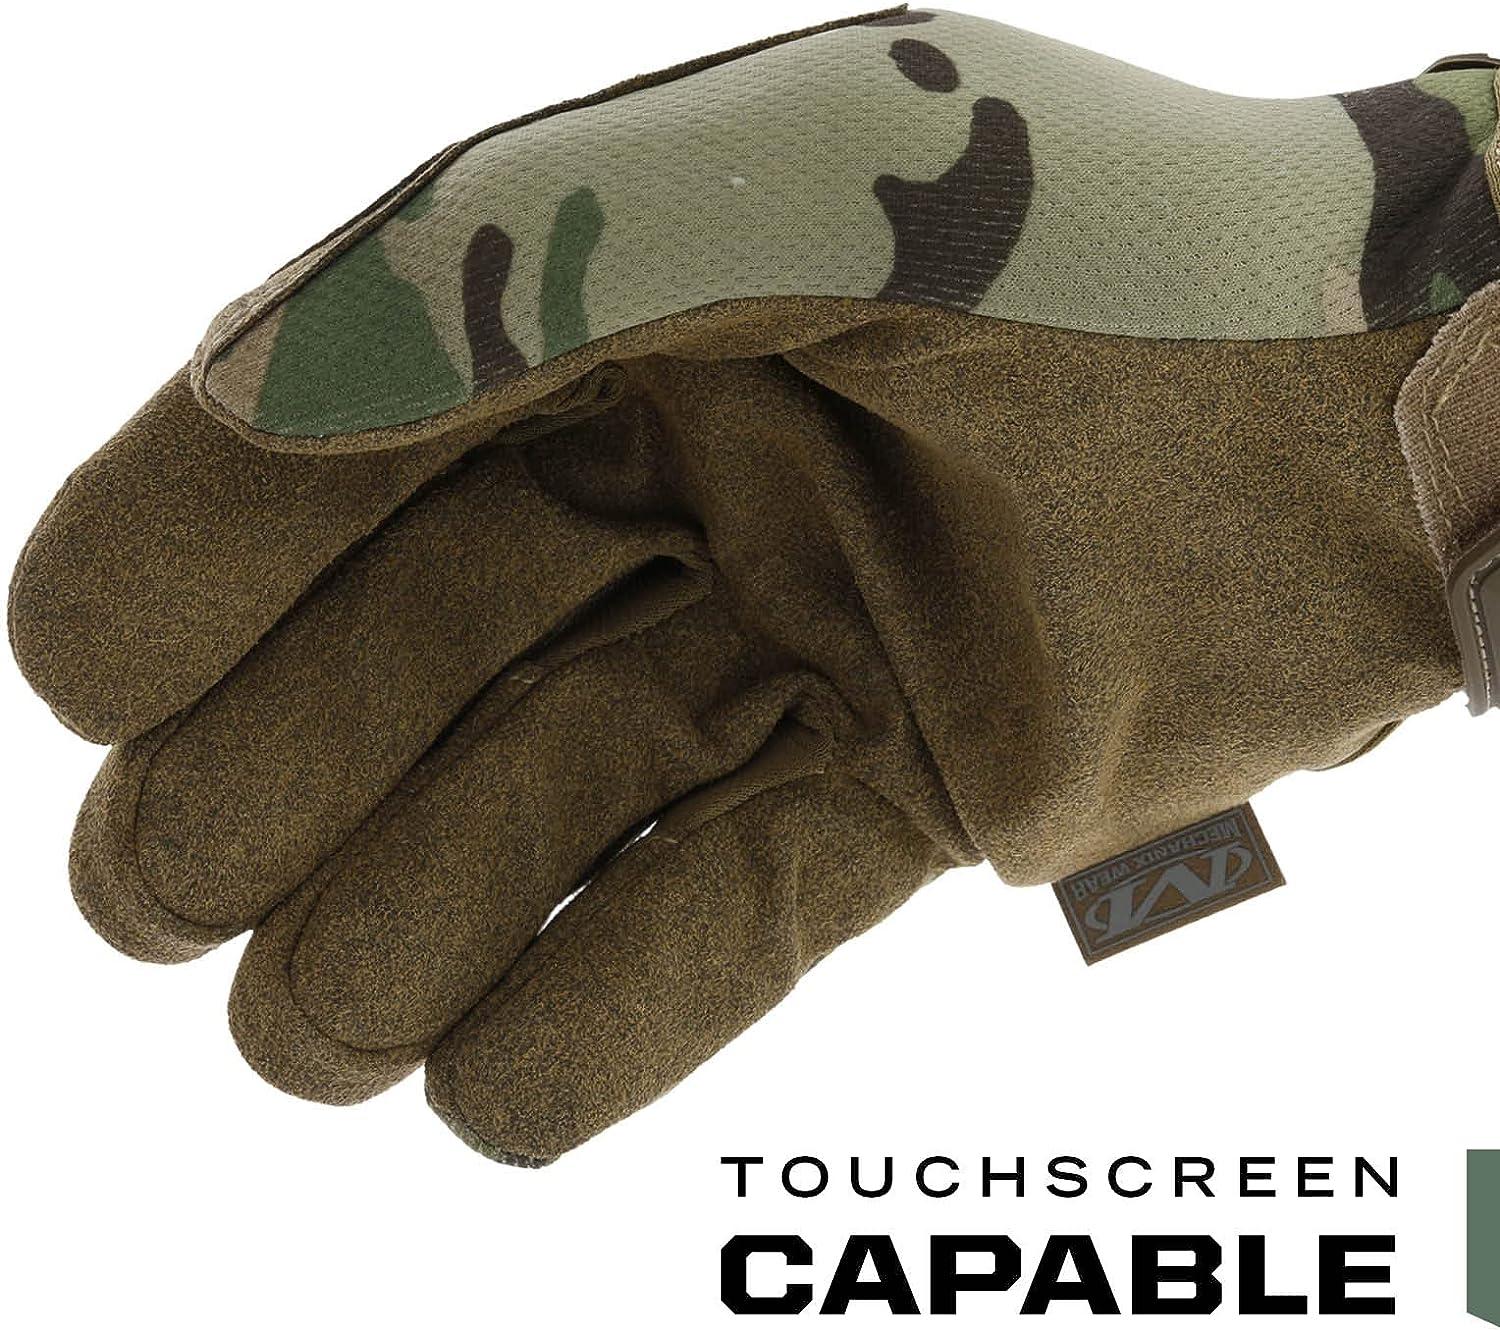 Mechanix Wear: The Original Tactical Work Gloves with Secure Fit, Flexible  Grip for Multi-Purpose Use, Durable Touchscreen Safety Gloves for Men  (Camouflage - MultiCam, X-Large) 2 Count (Pack of 1) Camouflage - Multicam